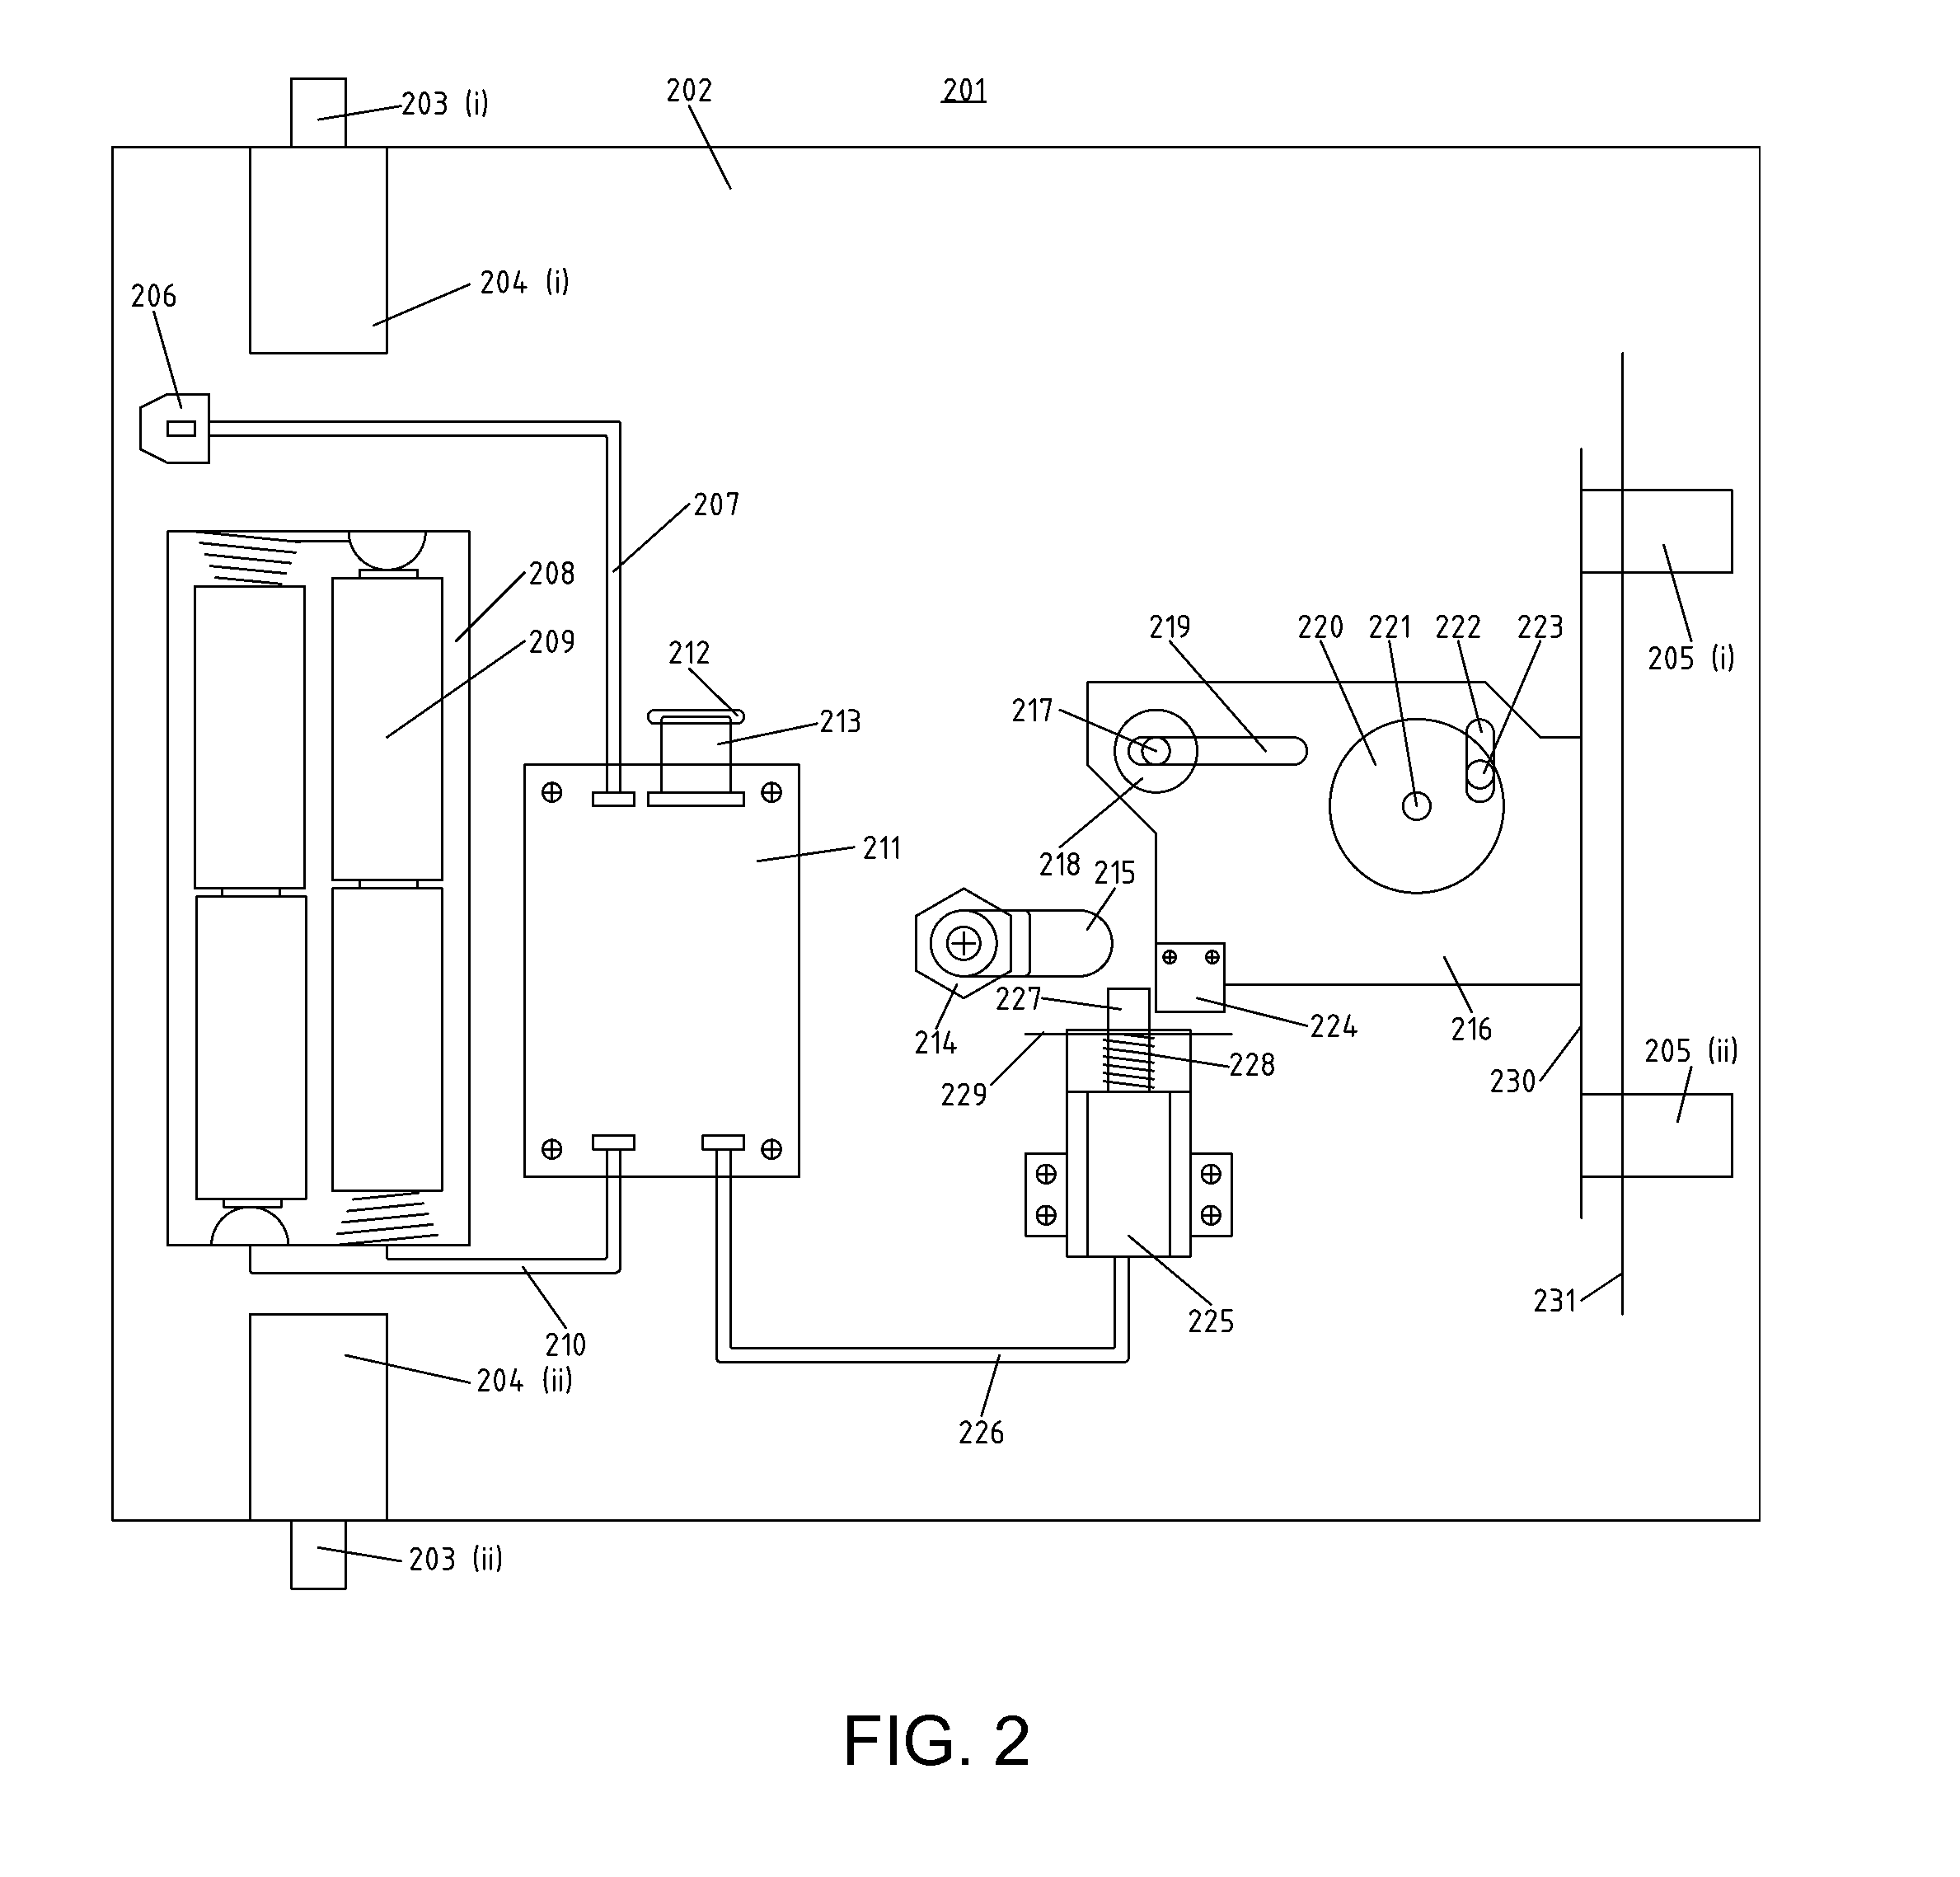 Device and Method for Self-Limiting Access to Objects and Substances